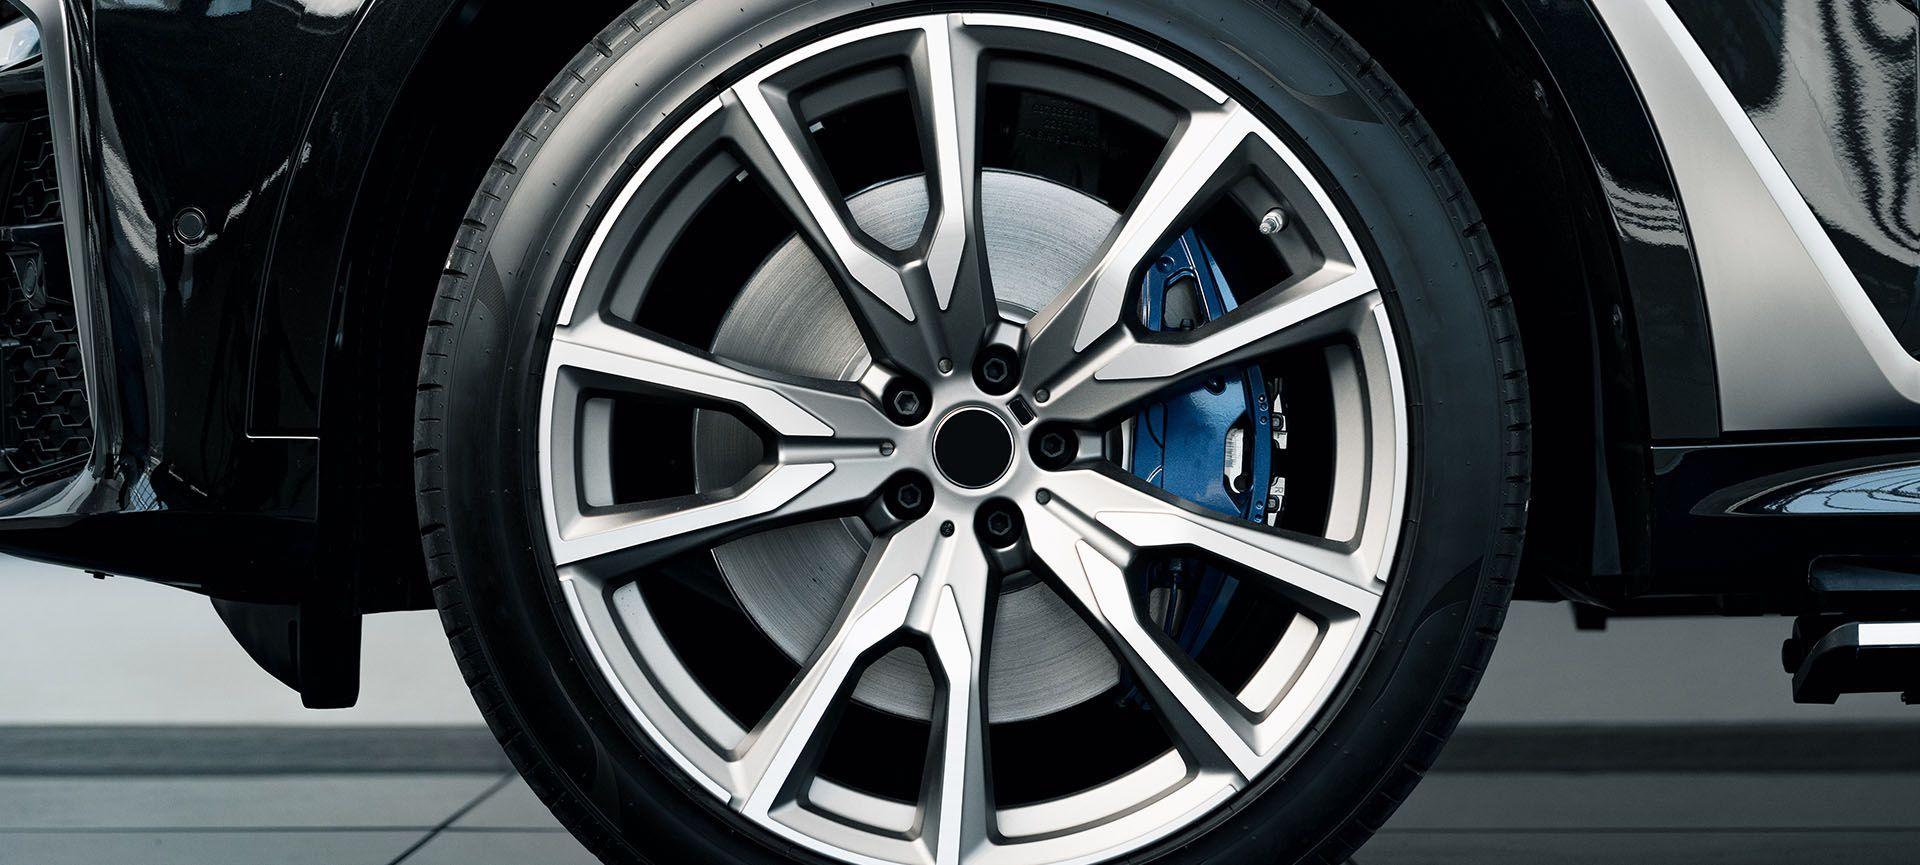 Rim Types: Understanding the Different Options and Their Suitability for Your Vehicle